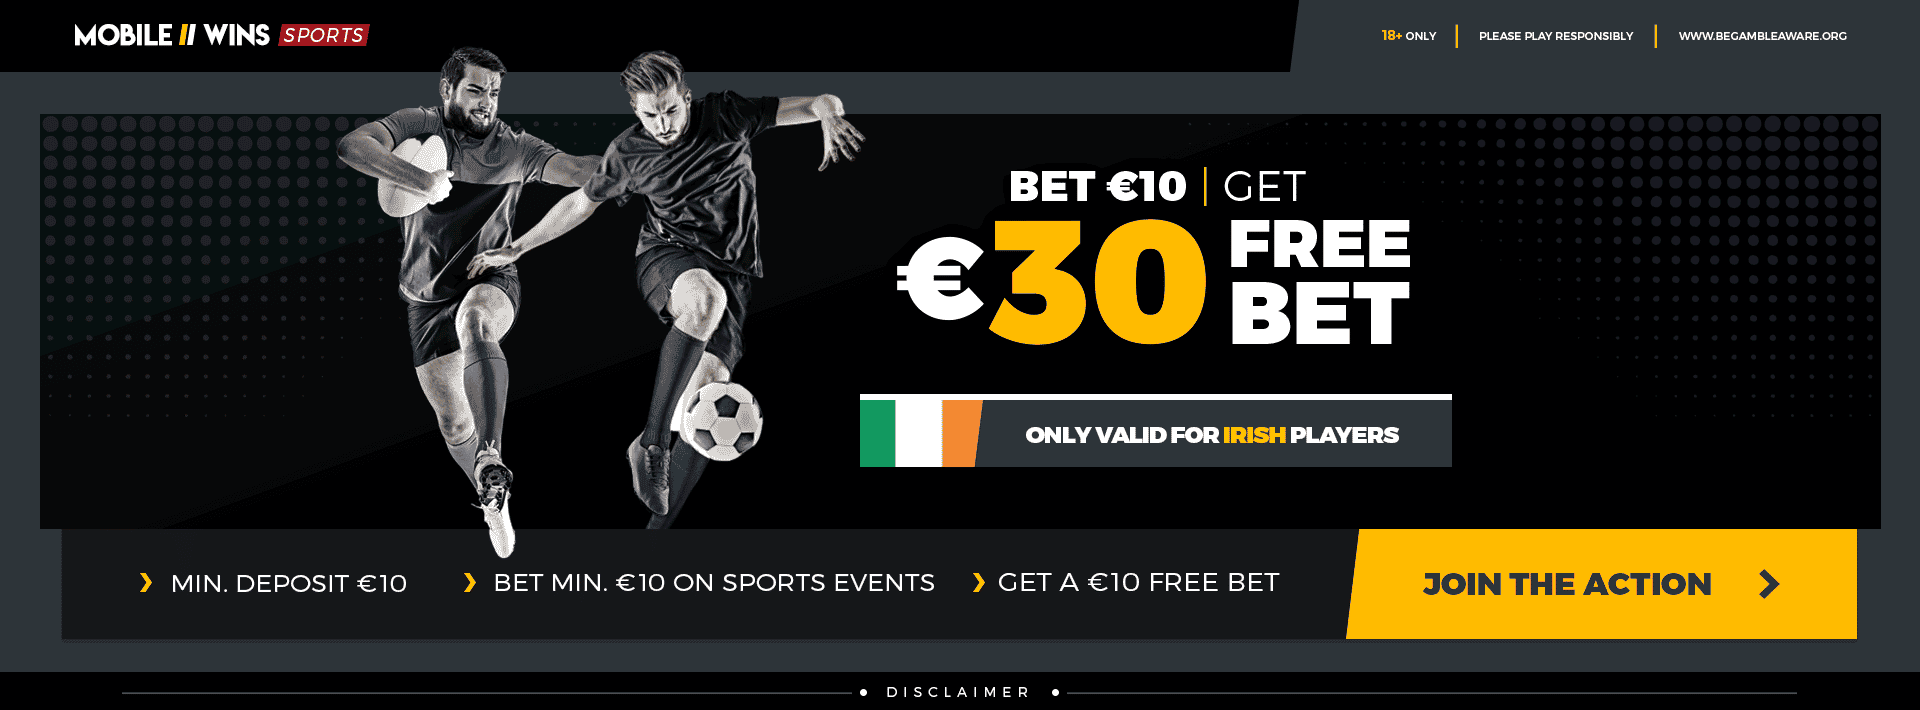 Bet 10 Get 30 - Irish Players Only